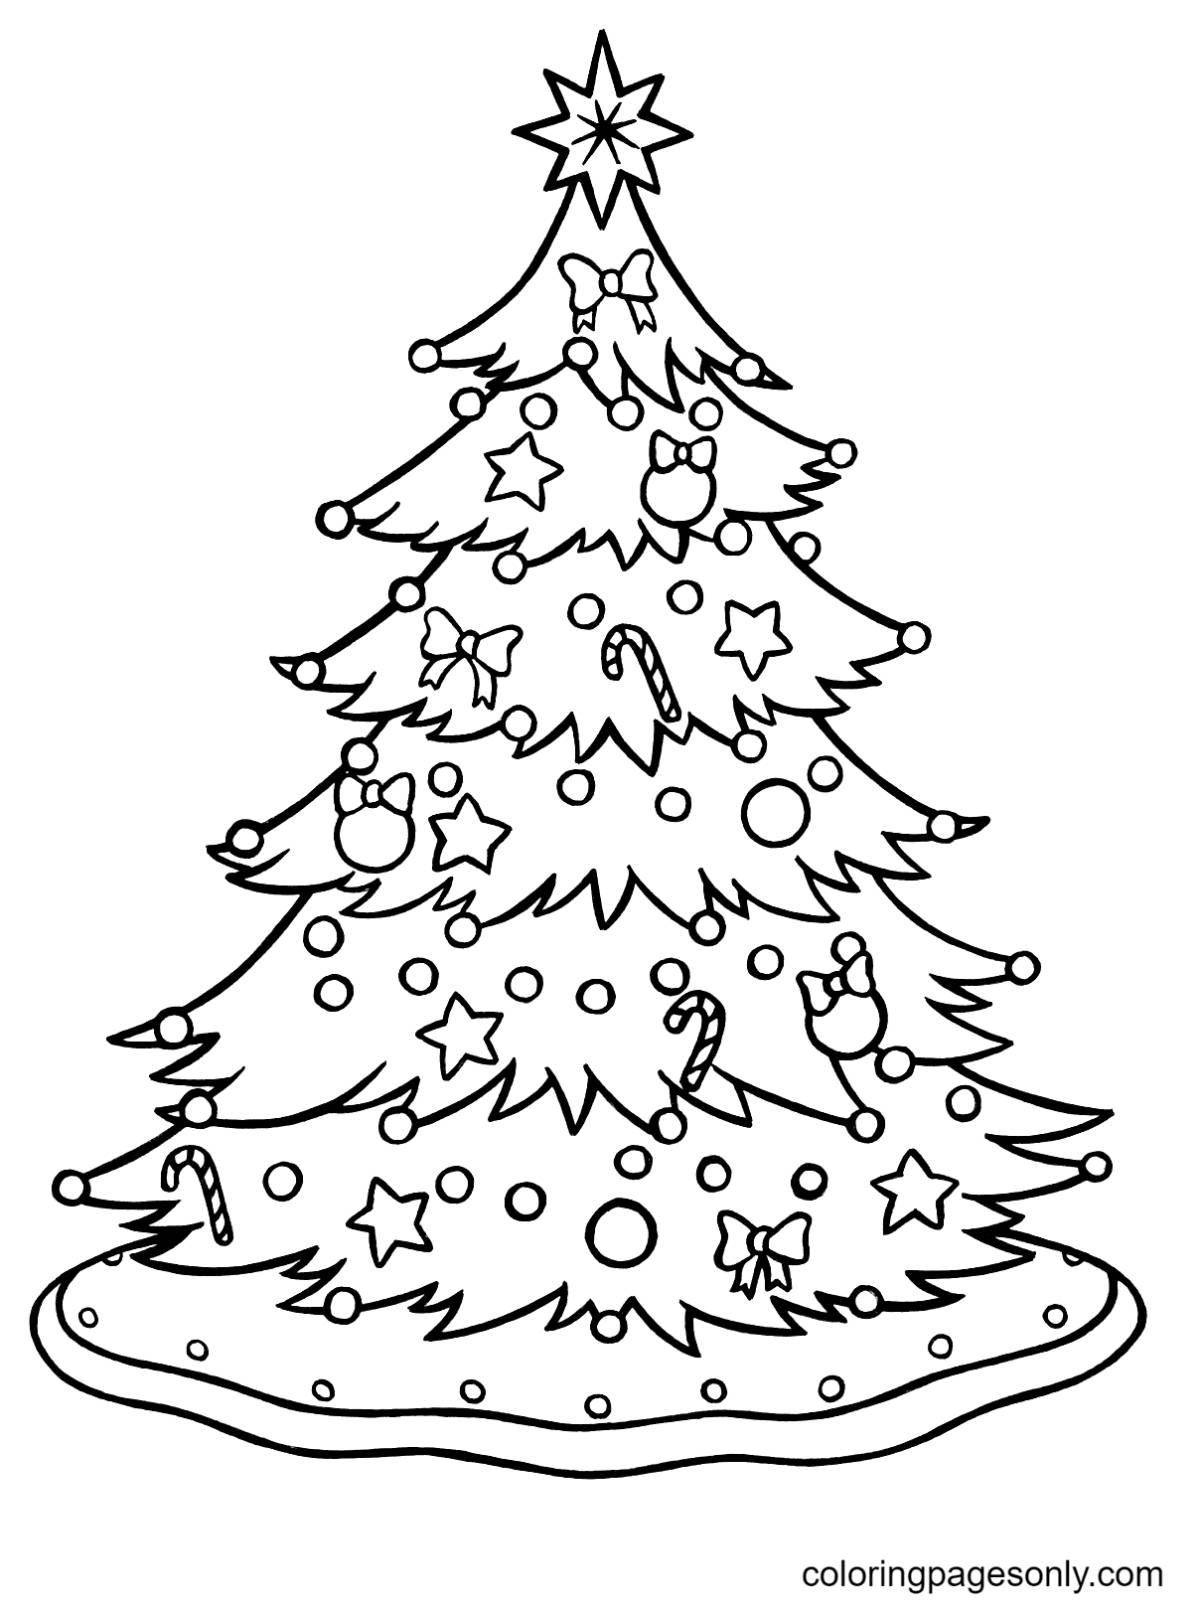 Cute Christmas tree coloring book for 5-6 year olds